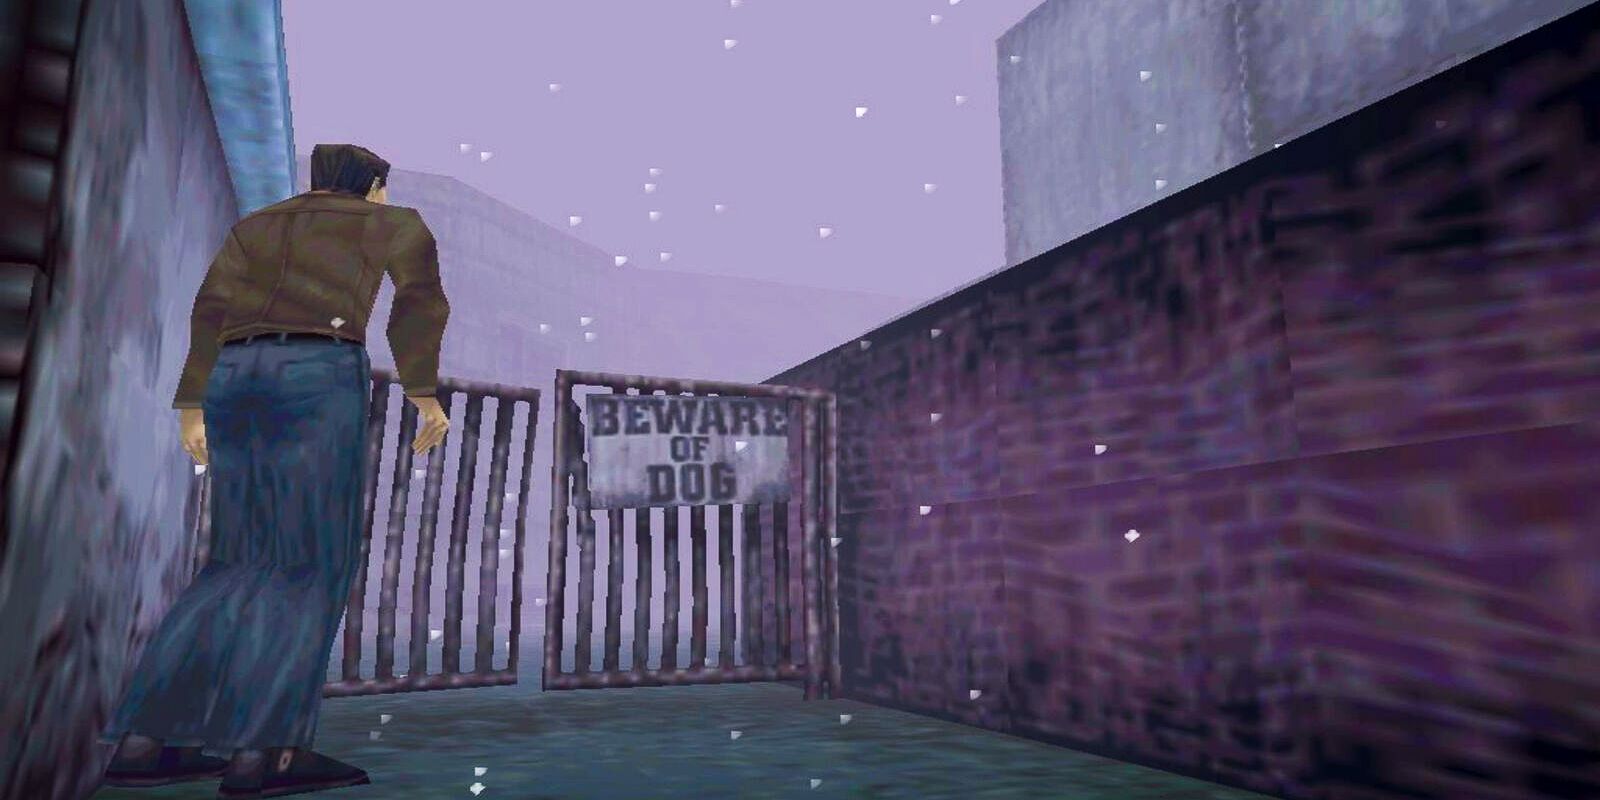 Slitterhead looks like a Silent Hill game that's making up for lost time